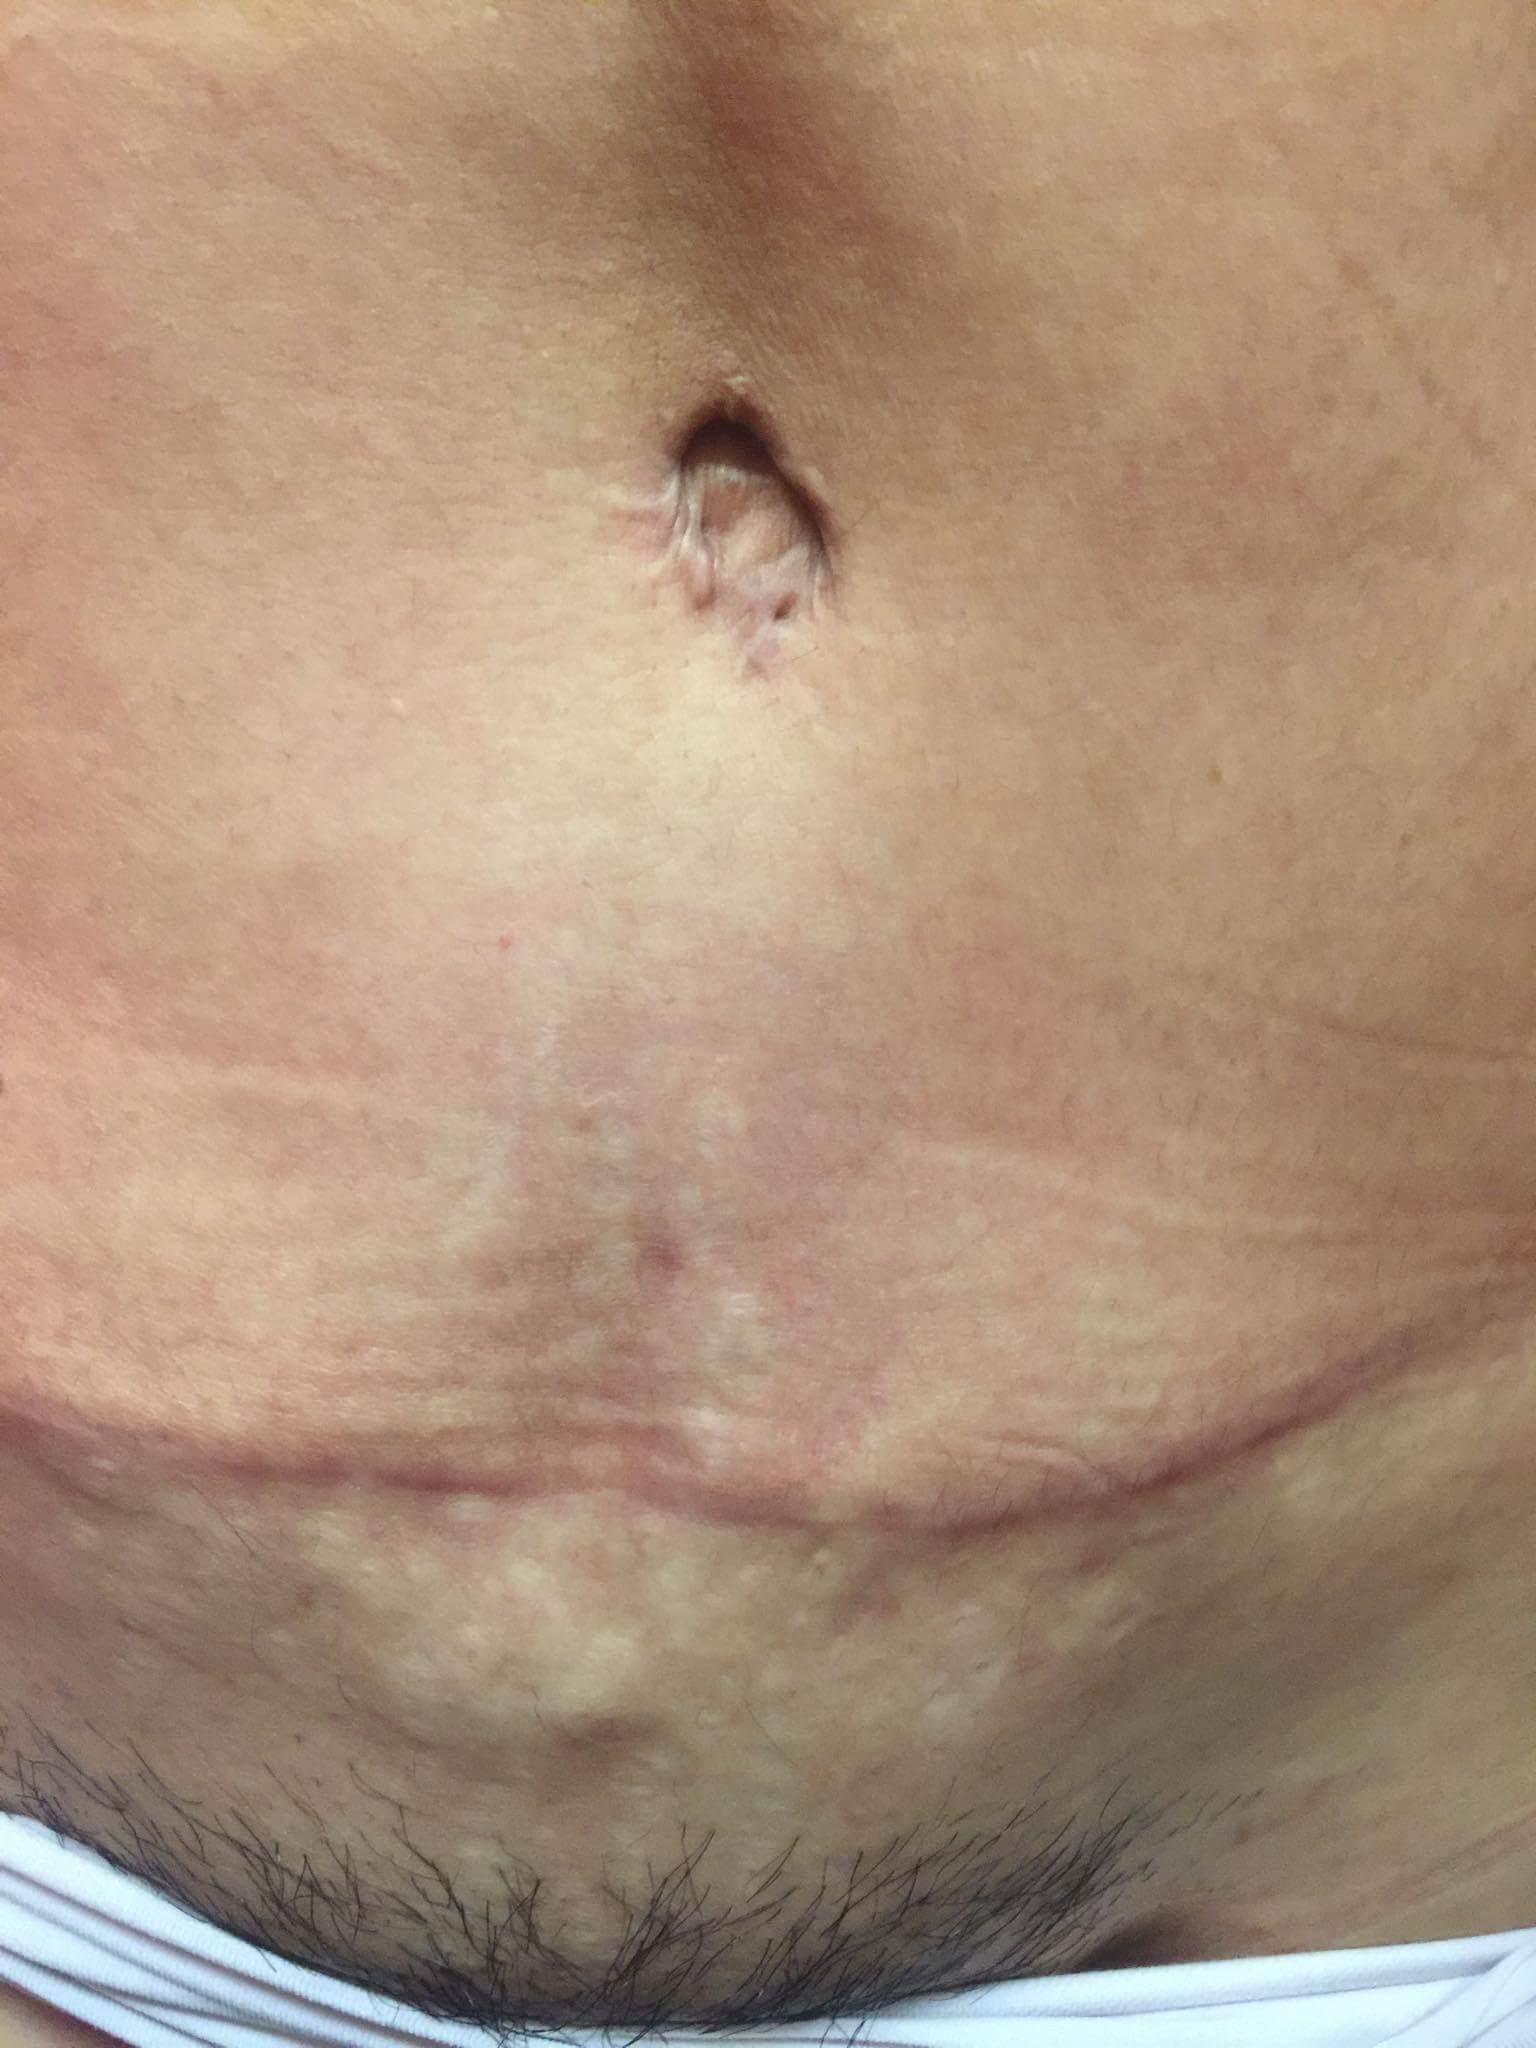 Tummy tuck cut completely crooked 